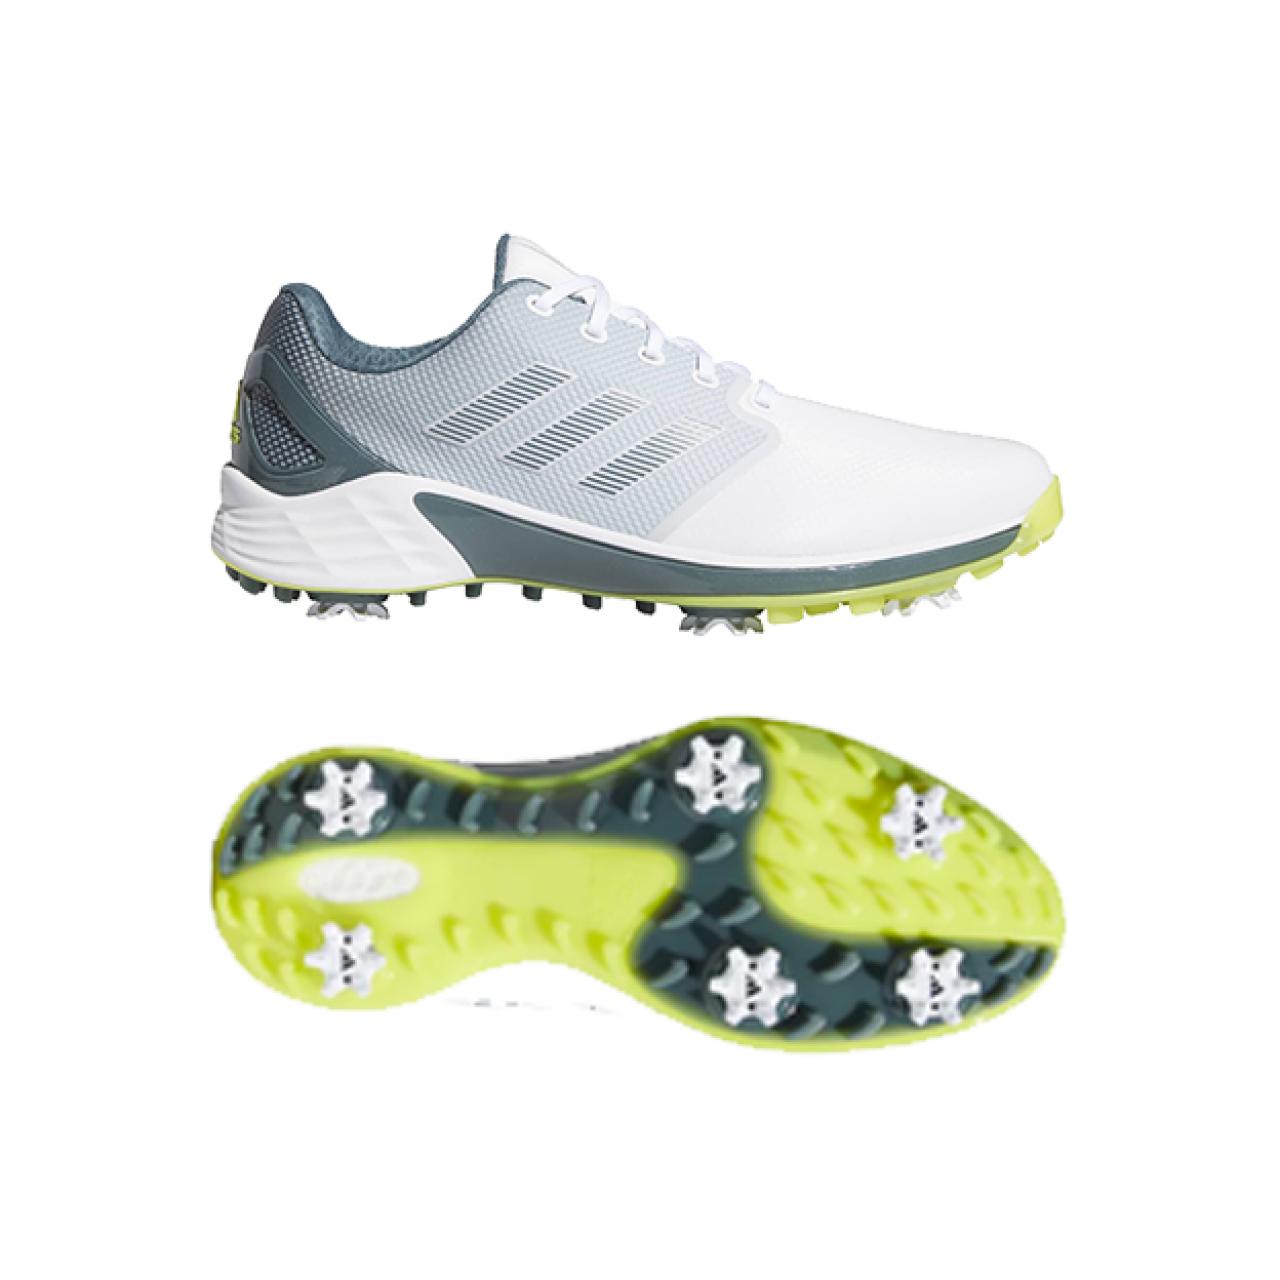 How to make your favorite pair of golf shoes last longer | Golf Equipment:  Clubs, Balls, Bags | Golf Digest